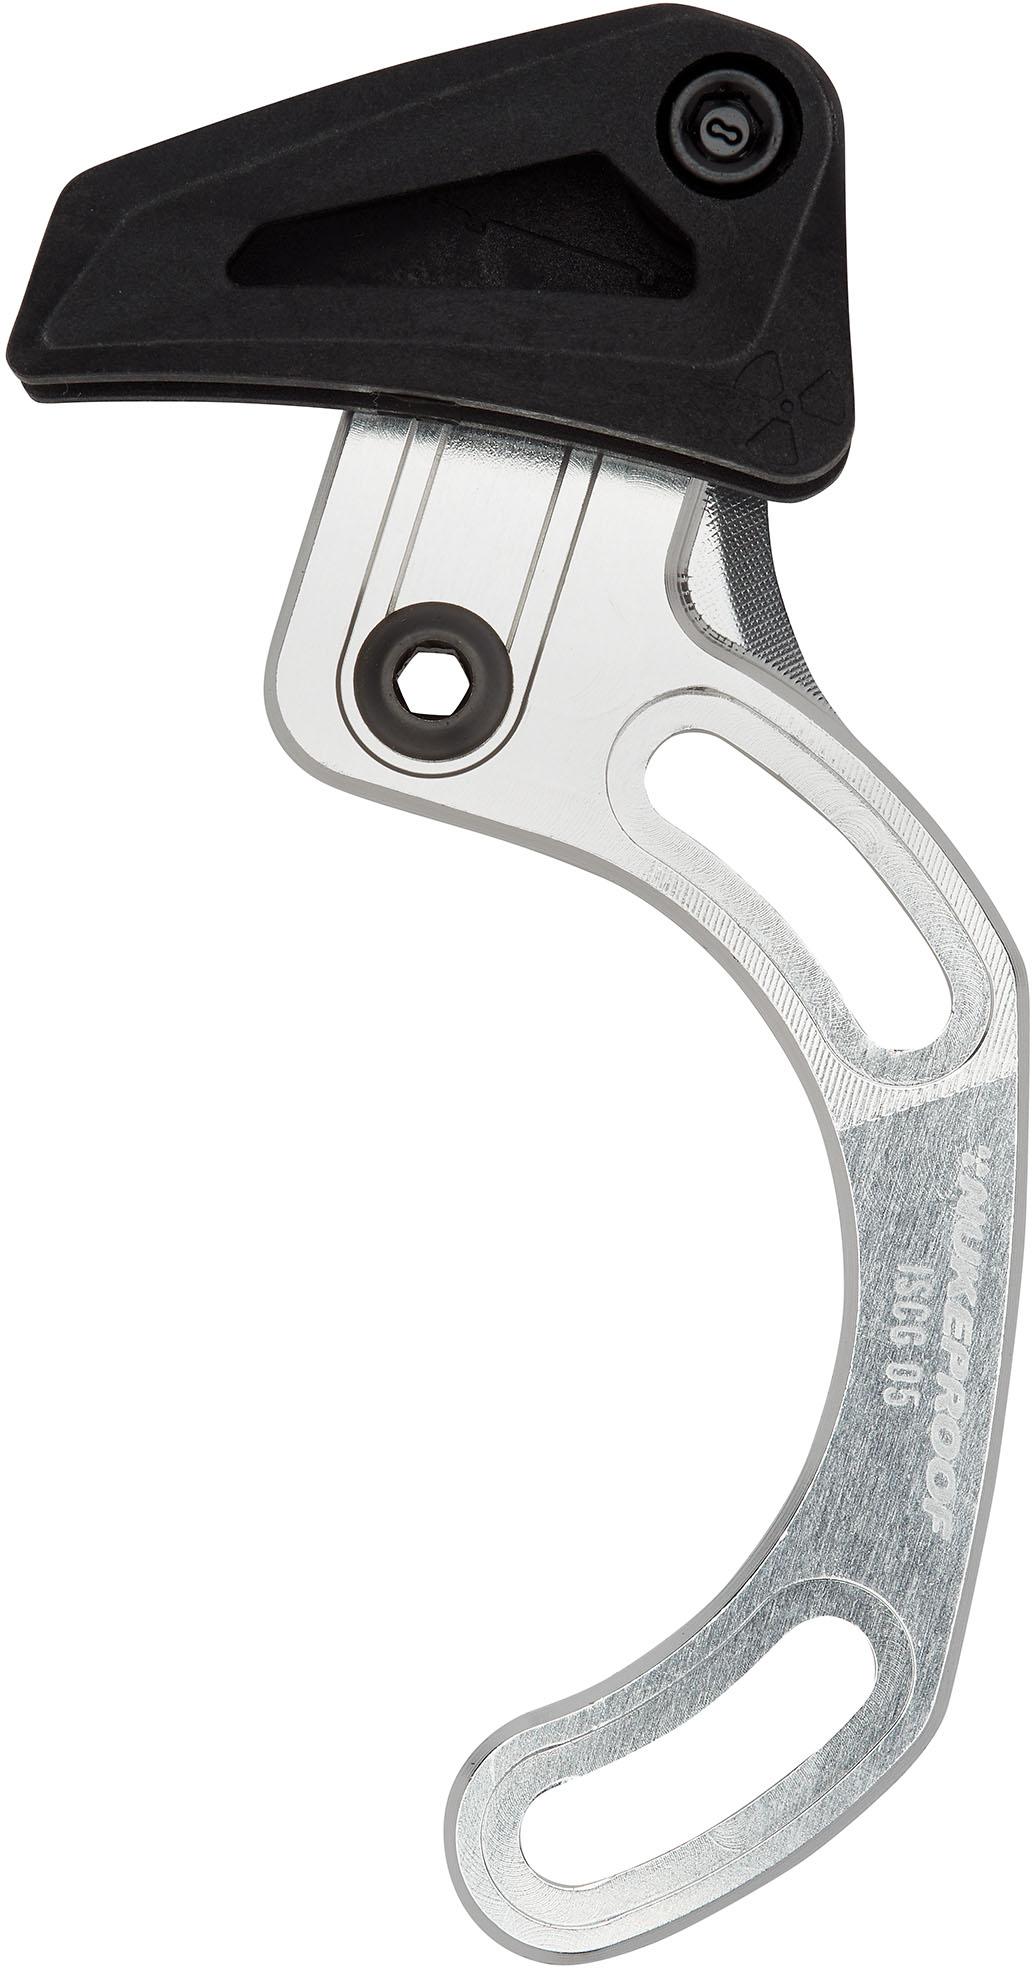 Nukeproof Chain Guide Iscg 05 Top Guide  Silver